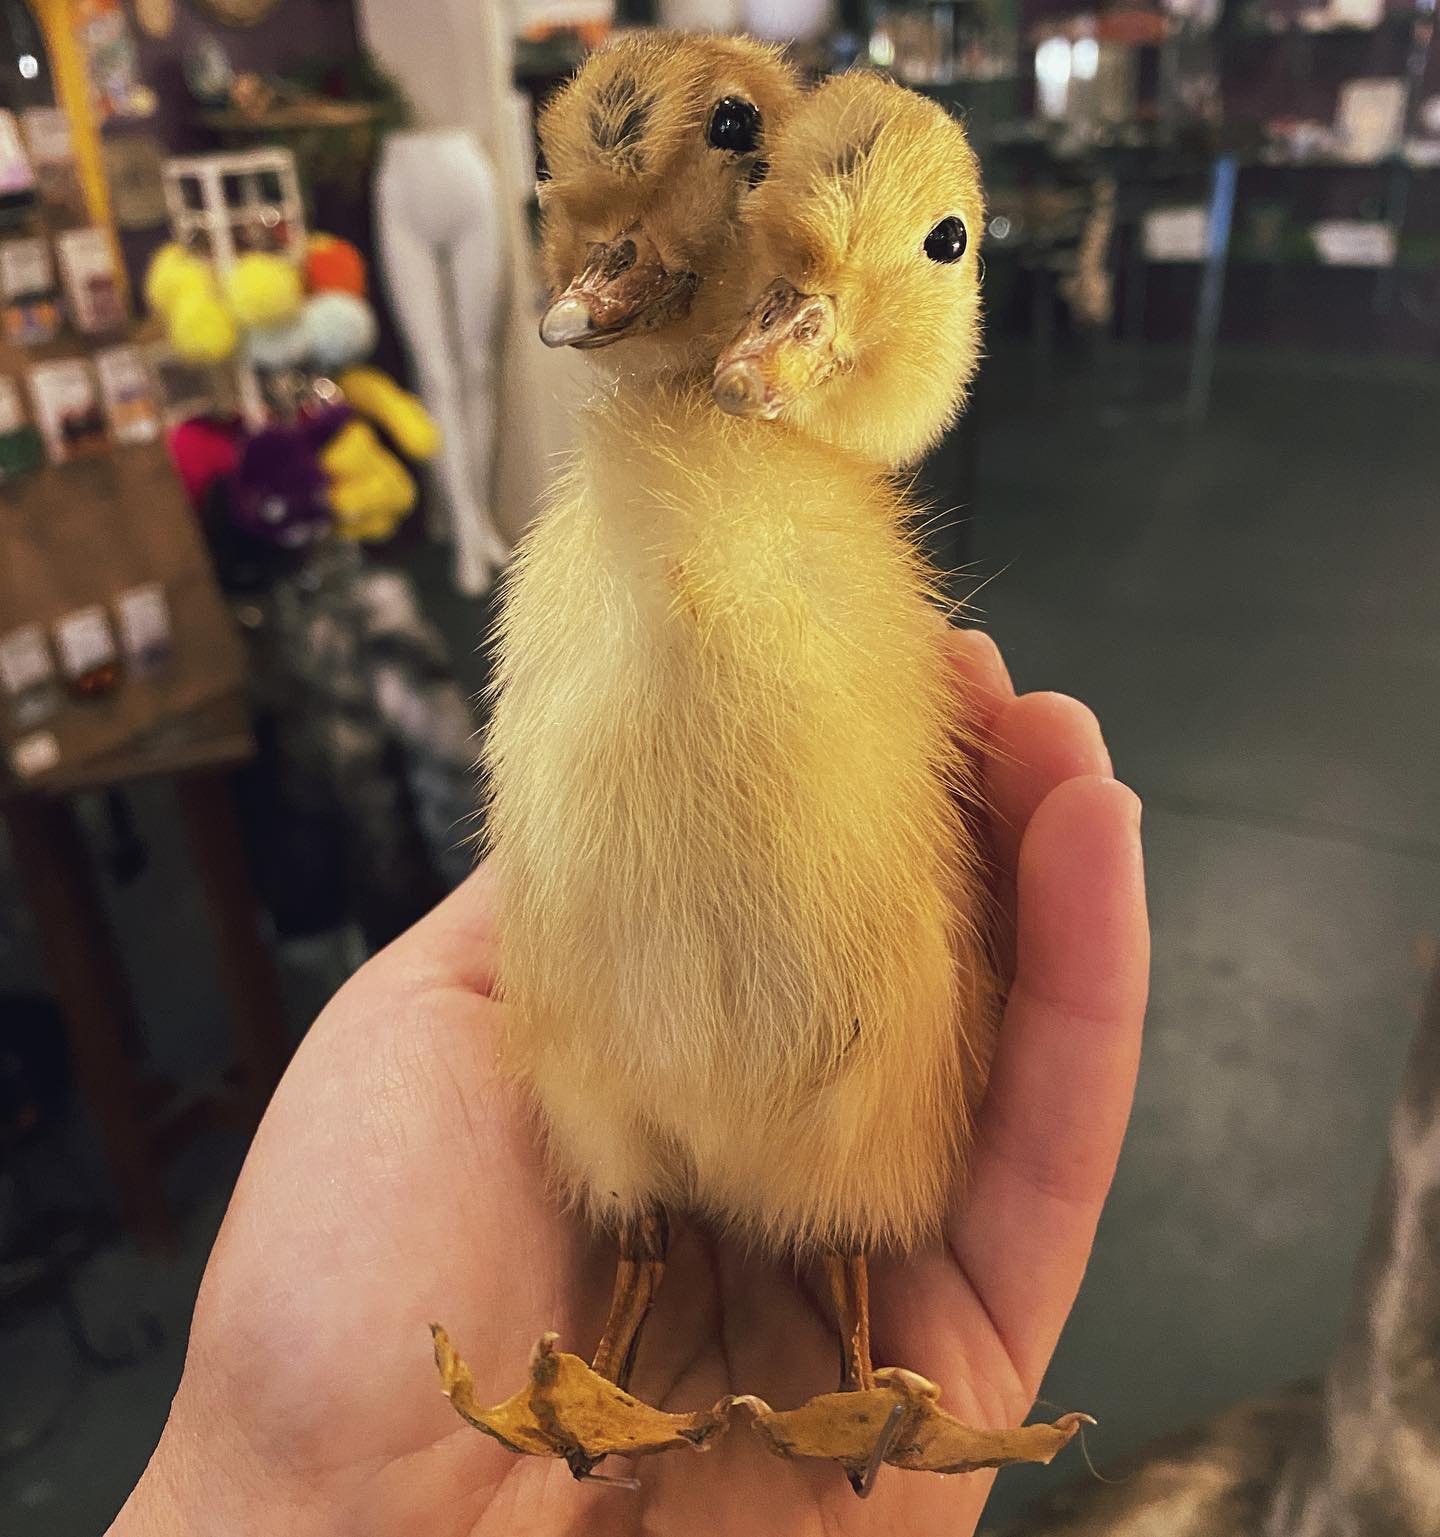 A two-headed bird in the hand is worth four in the bush 🐥🌳 We&rsquo;re open until 6pm today! ✨
.
.
.
.
.
.
.
#strange #unusual #thestrangeandunusual #oddities #oddity #duckling #taxidermy #ducklings #odditiesandcuriosities